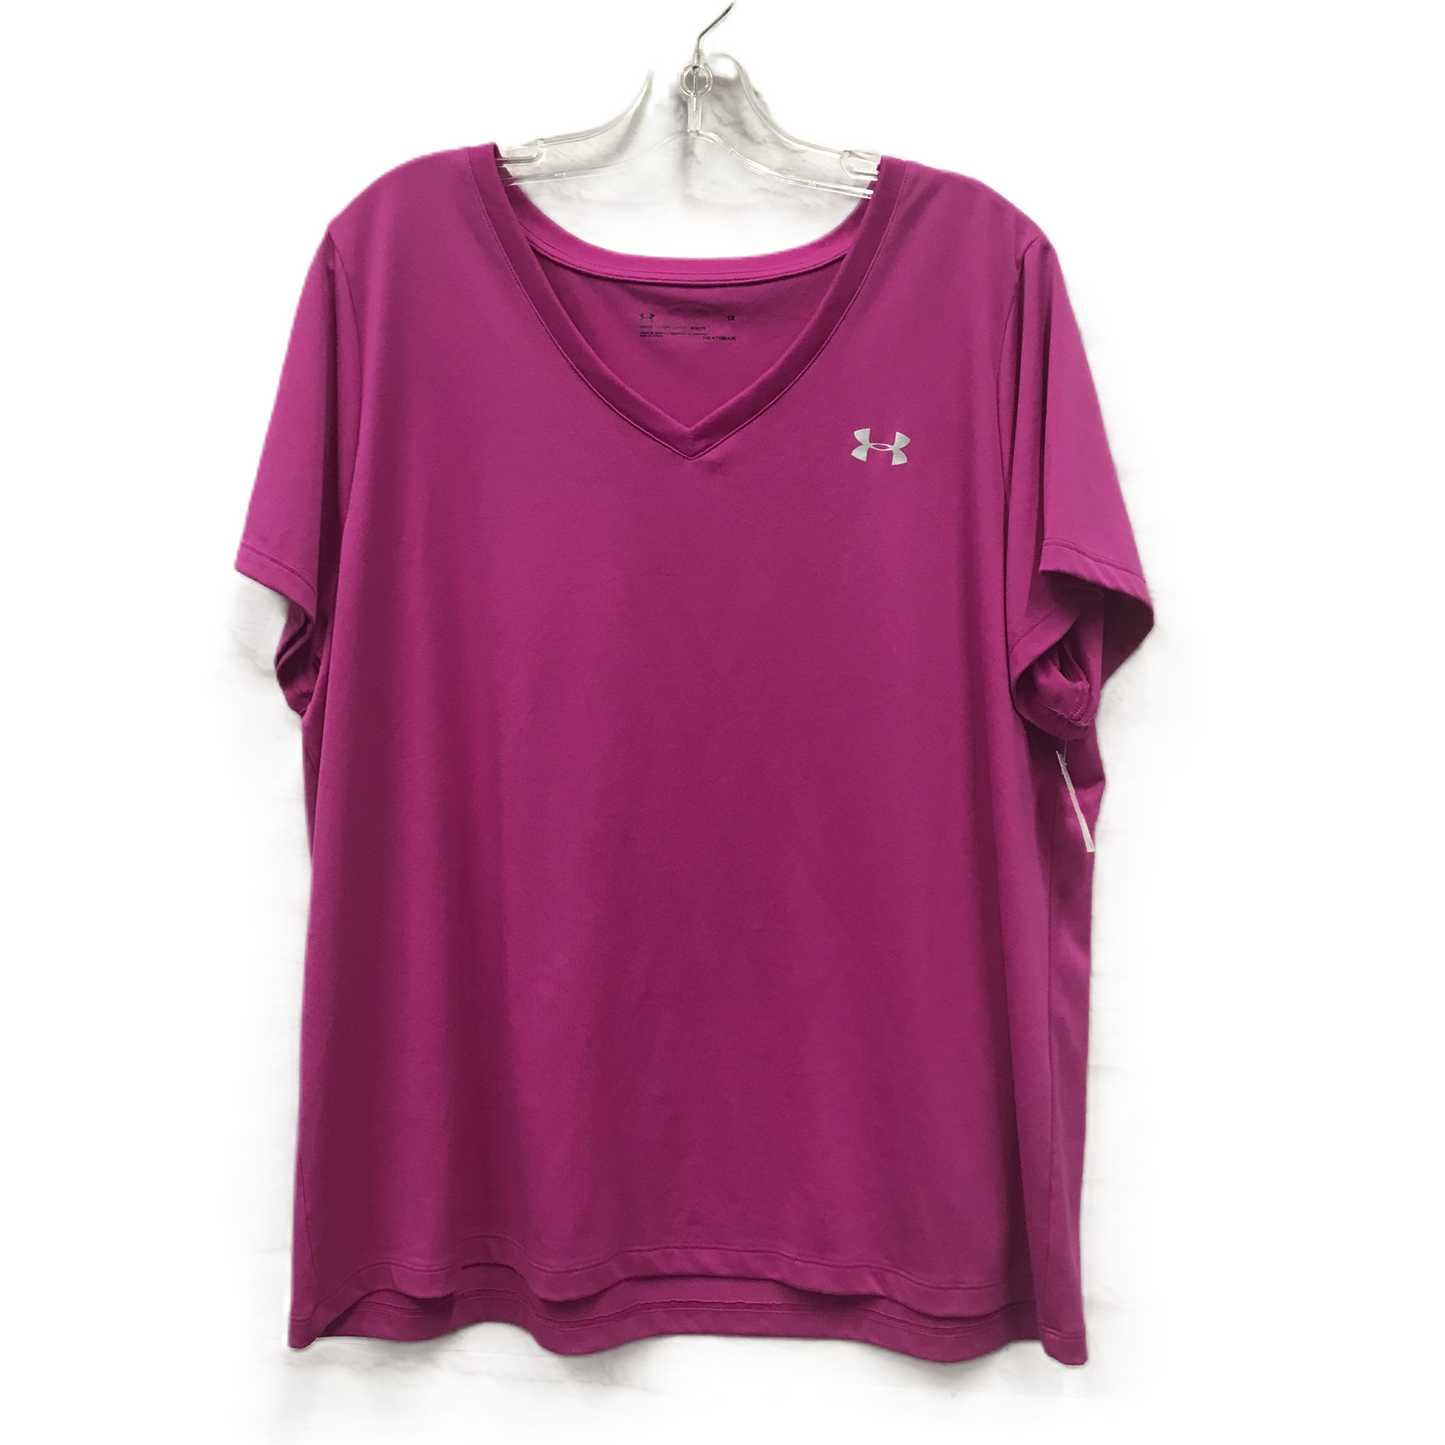 Pink Athletic Top Short Sleeve By Under Armour, Size: 1x